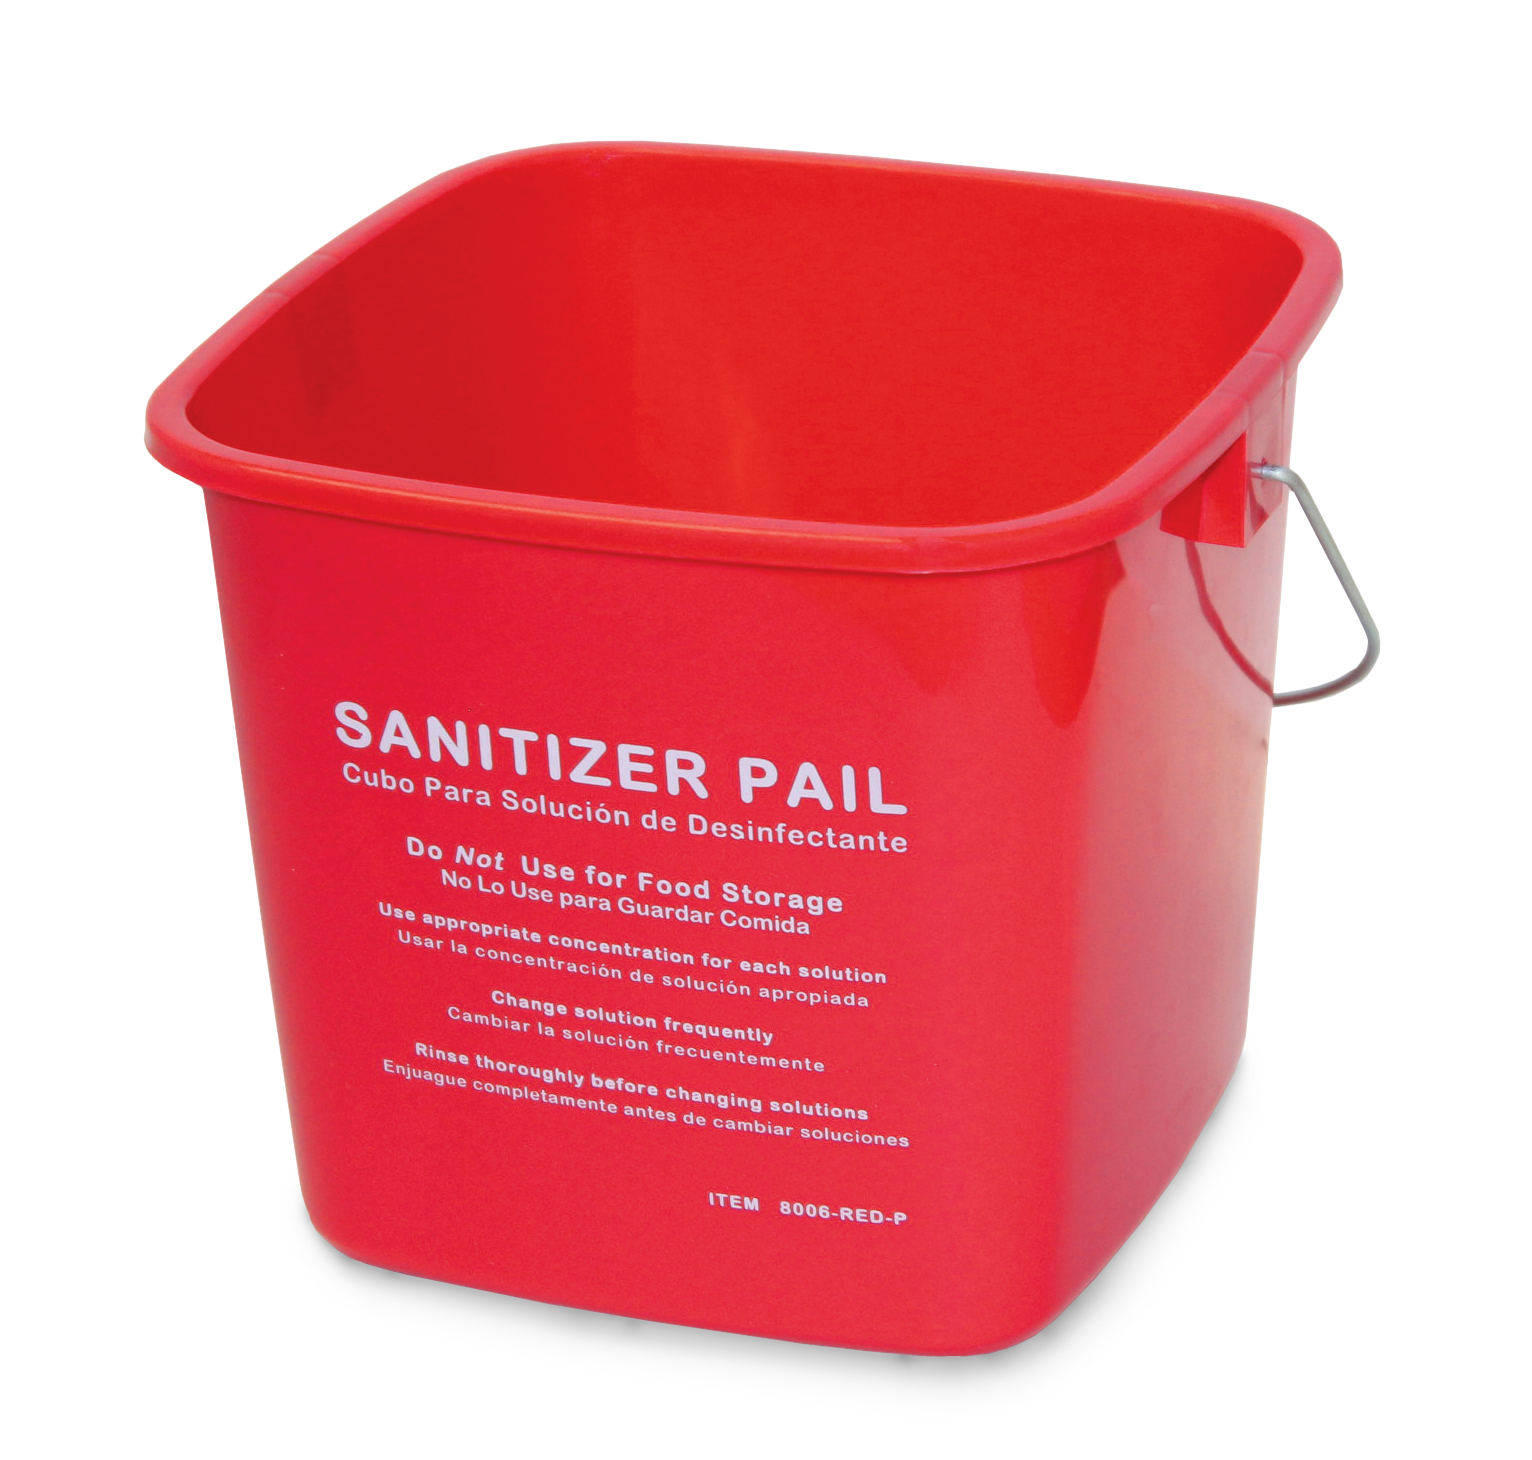 small red plastic pails